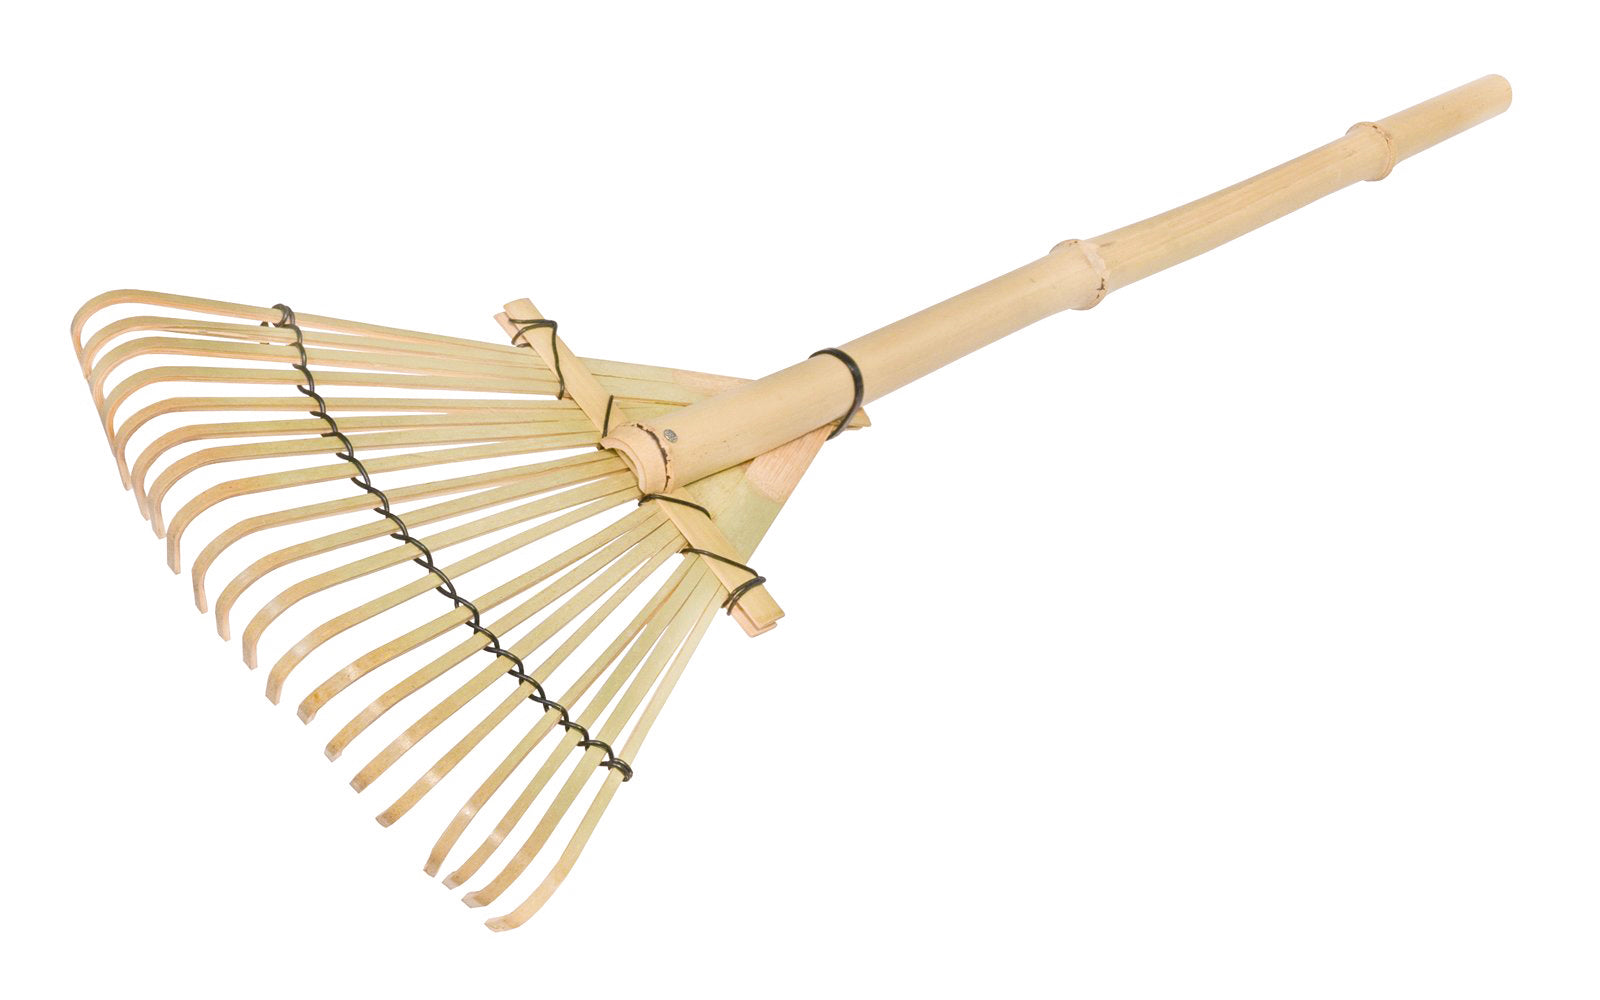 Made in Japan · Traditional Japanese hand bamboo rake great for getting into smaller areas more difficult for conventional rakes. An excellent small rake that's great for grasses & leaves in tight places - Small Bamboo Rake - Mini Bamboo Rake - Japanese Garden - 27" overall length - Made of Bamboo - 8" width of head